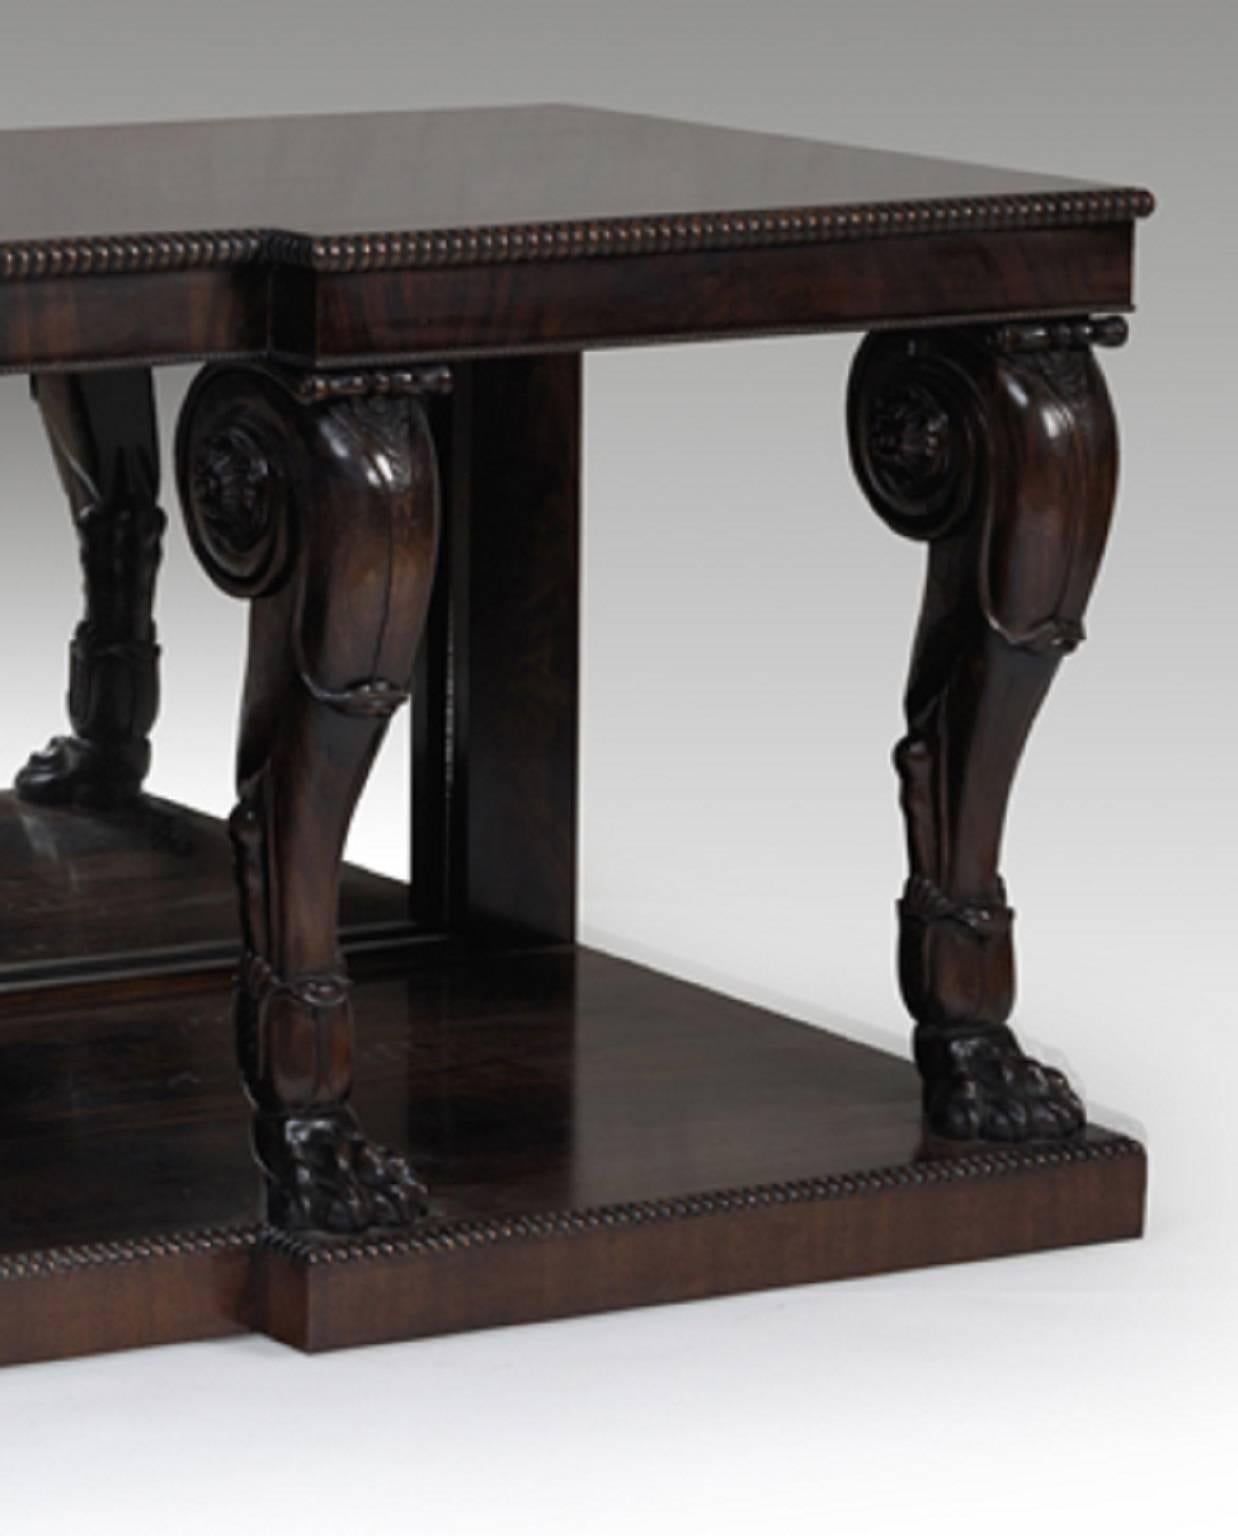 A pair of grand scale Regency design carved mahogany console tables with four Grand Tour inspired legs to the front, the backs inset with mirror panels, all sitting on singular plinths bespoke polished and aged to appear of the period. These